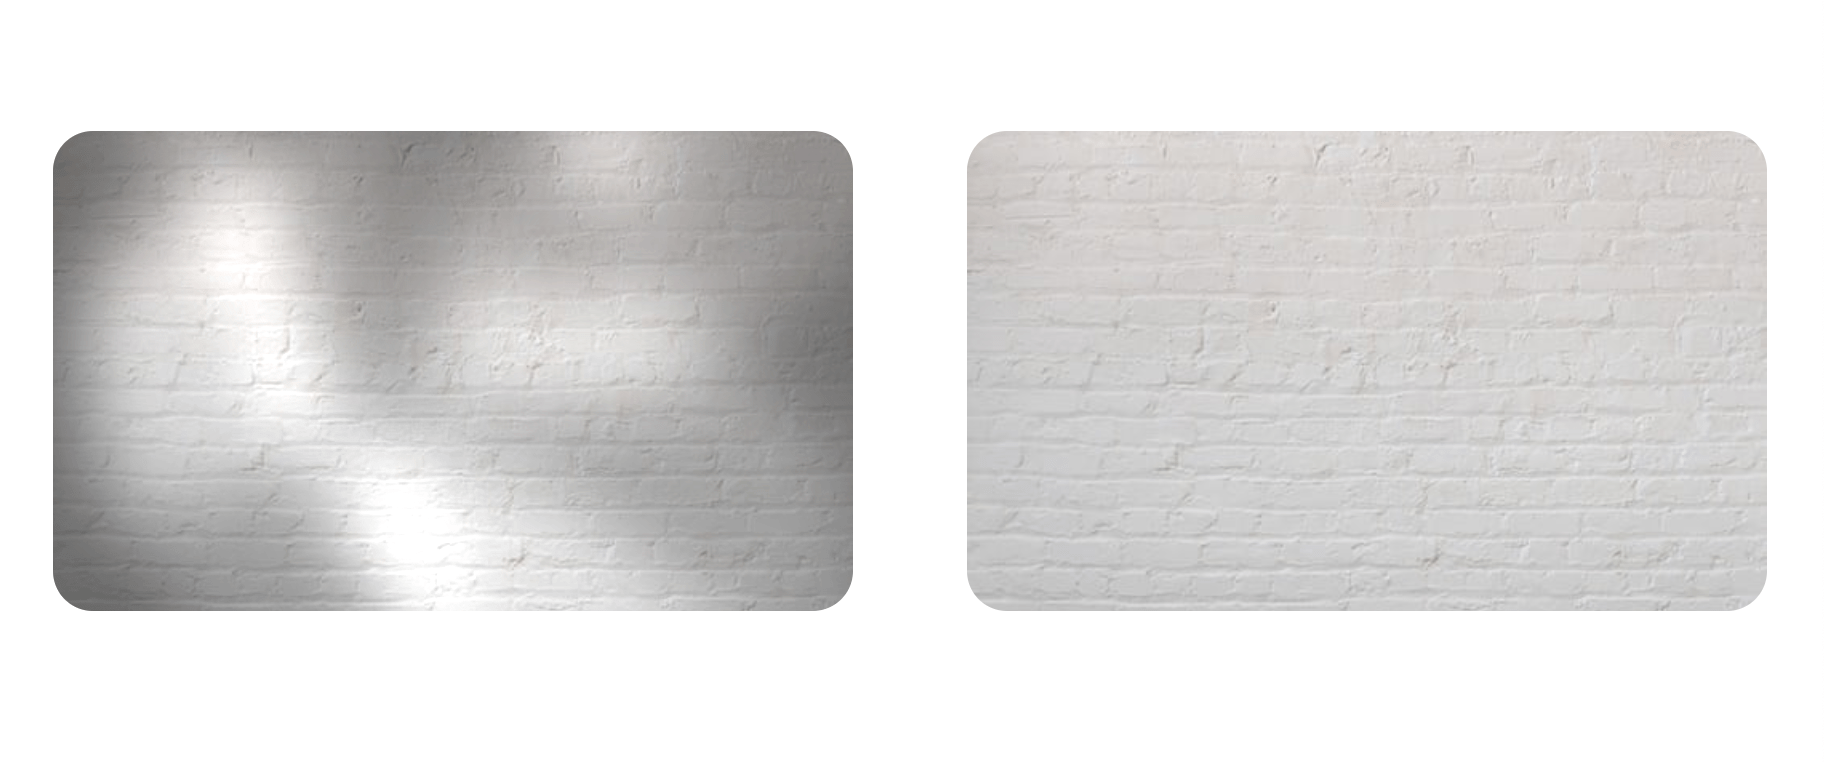 A side-by-side comparison of the same white brick surface, the left showing the CSS dappled light effect compared to no shadows.